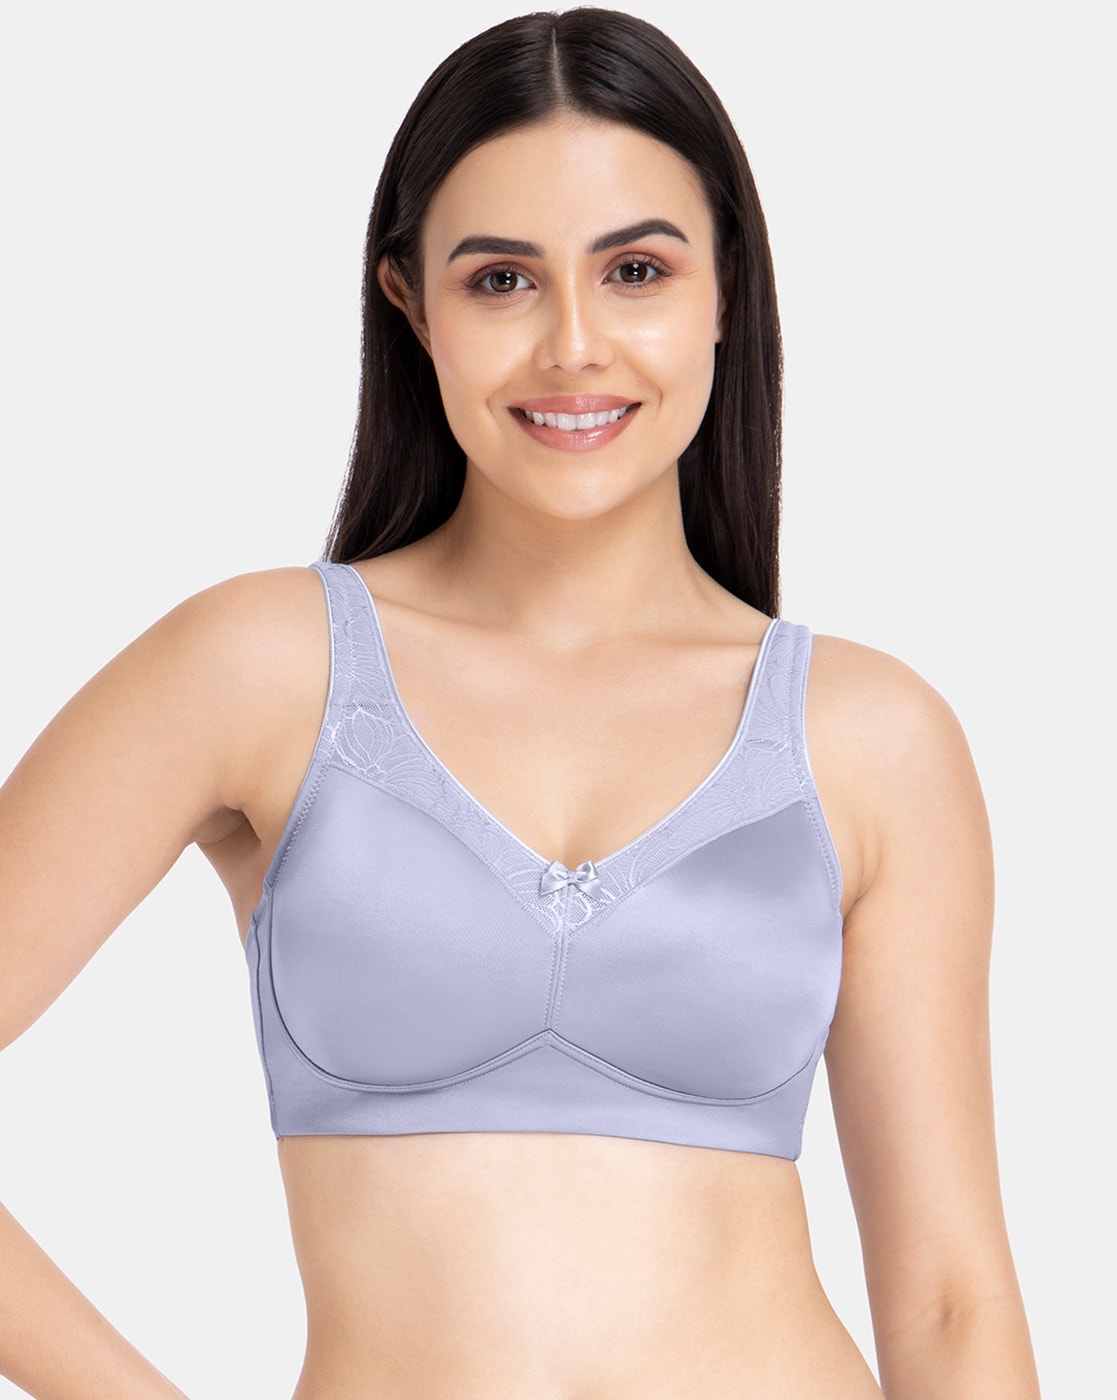 Buy Grey Bras for Women by Amante Online